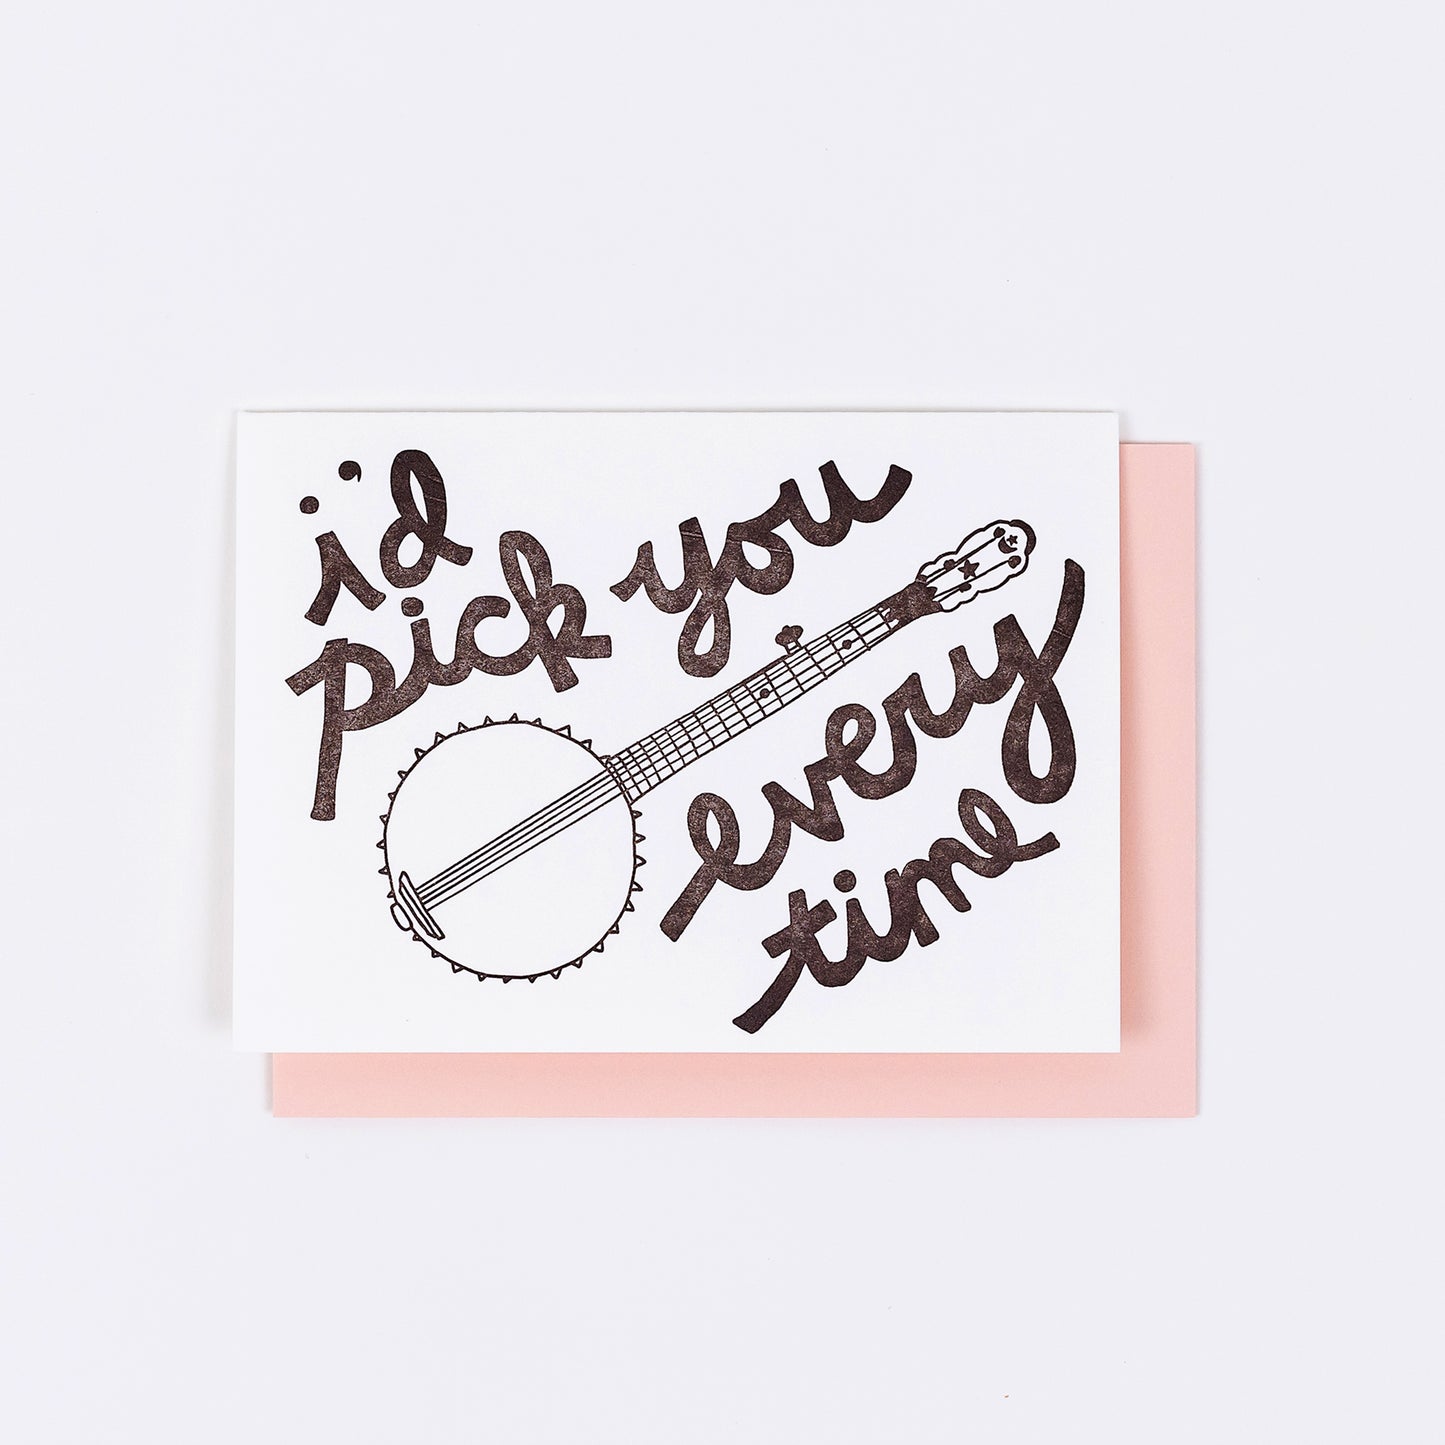 Letterpress greeting card featuring a hand-drawn banjo, printed in an earthy brown ink. Whimsical hand-drawn text saying "I'd Pick You Everytime" surrounds the banjo, in the same pink ink. The card is white, blank inside, and is paired with a light pink envelope.